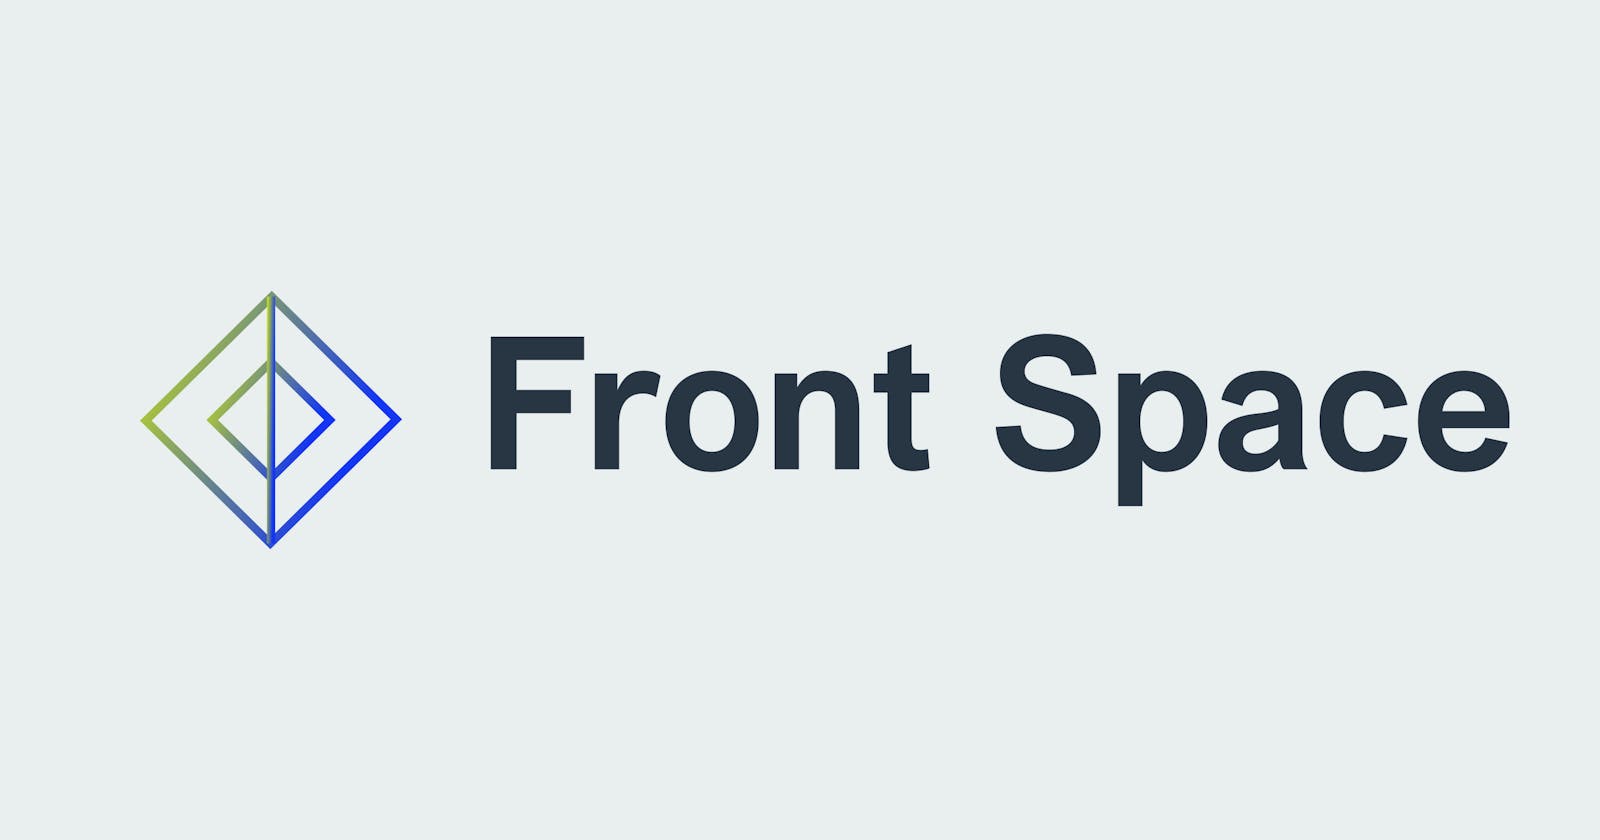 Front Space: Create your portfolio in seconds